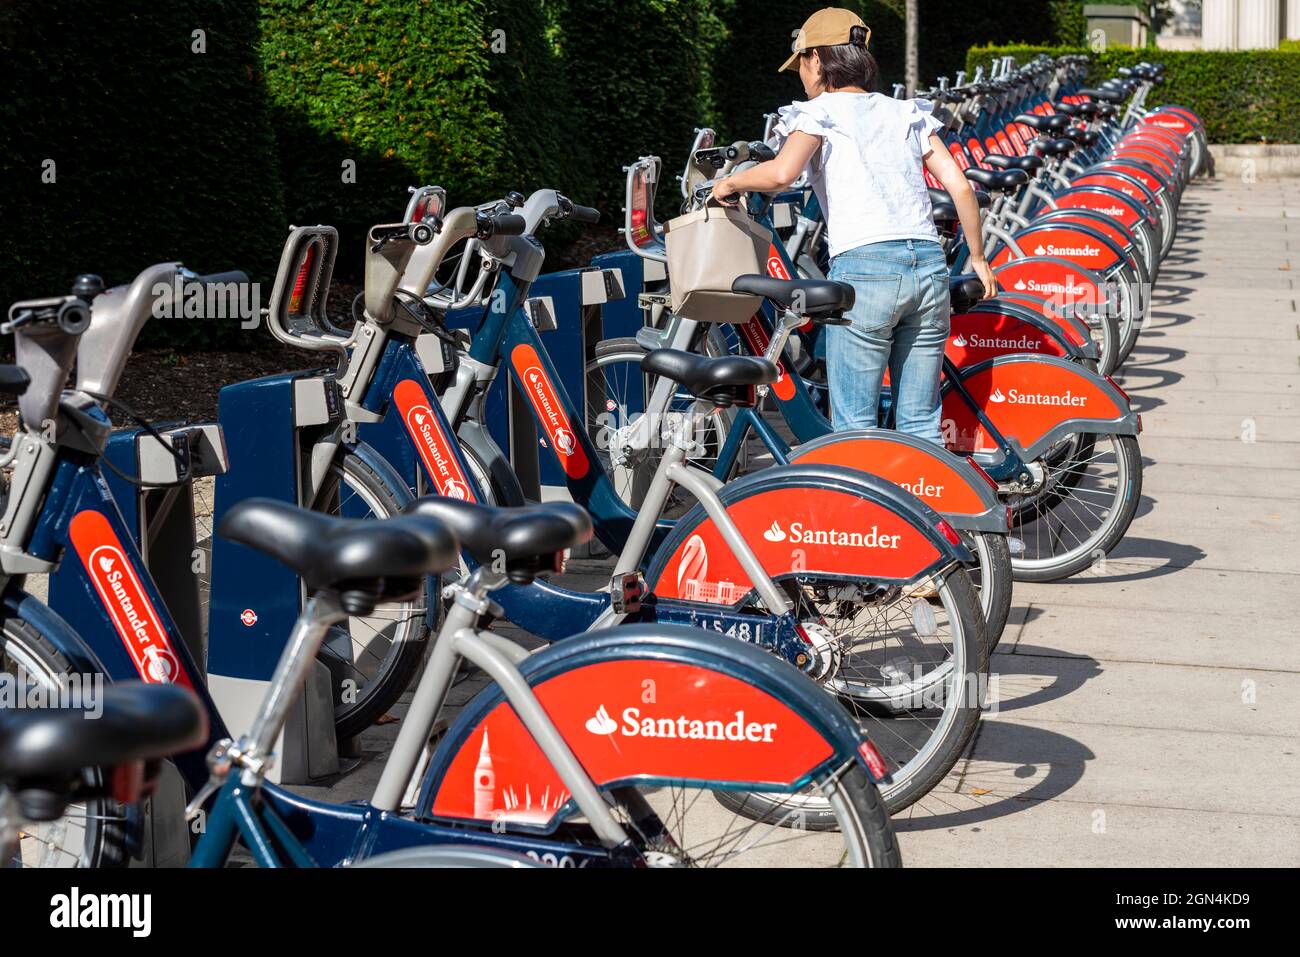 Santander Cycles in a docking station in Westminster, London. Public bicycle hire scheme in the City of London, UK. Person selecting a bike to ride Stock Photo